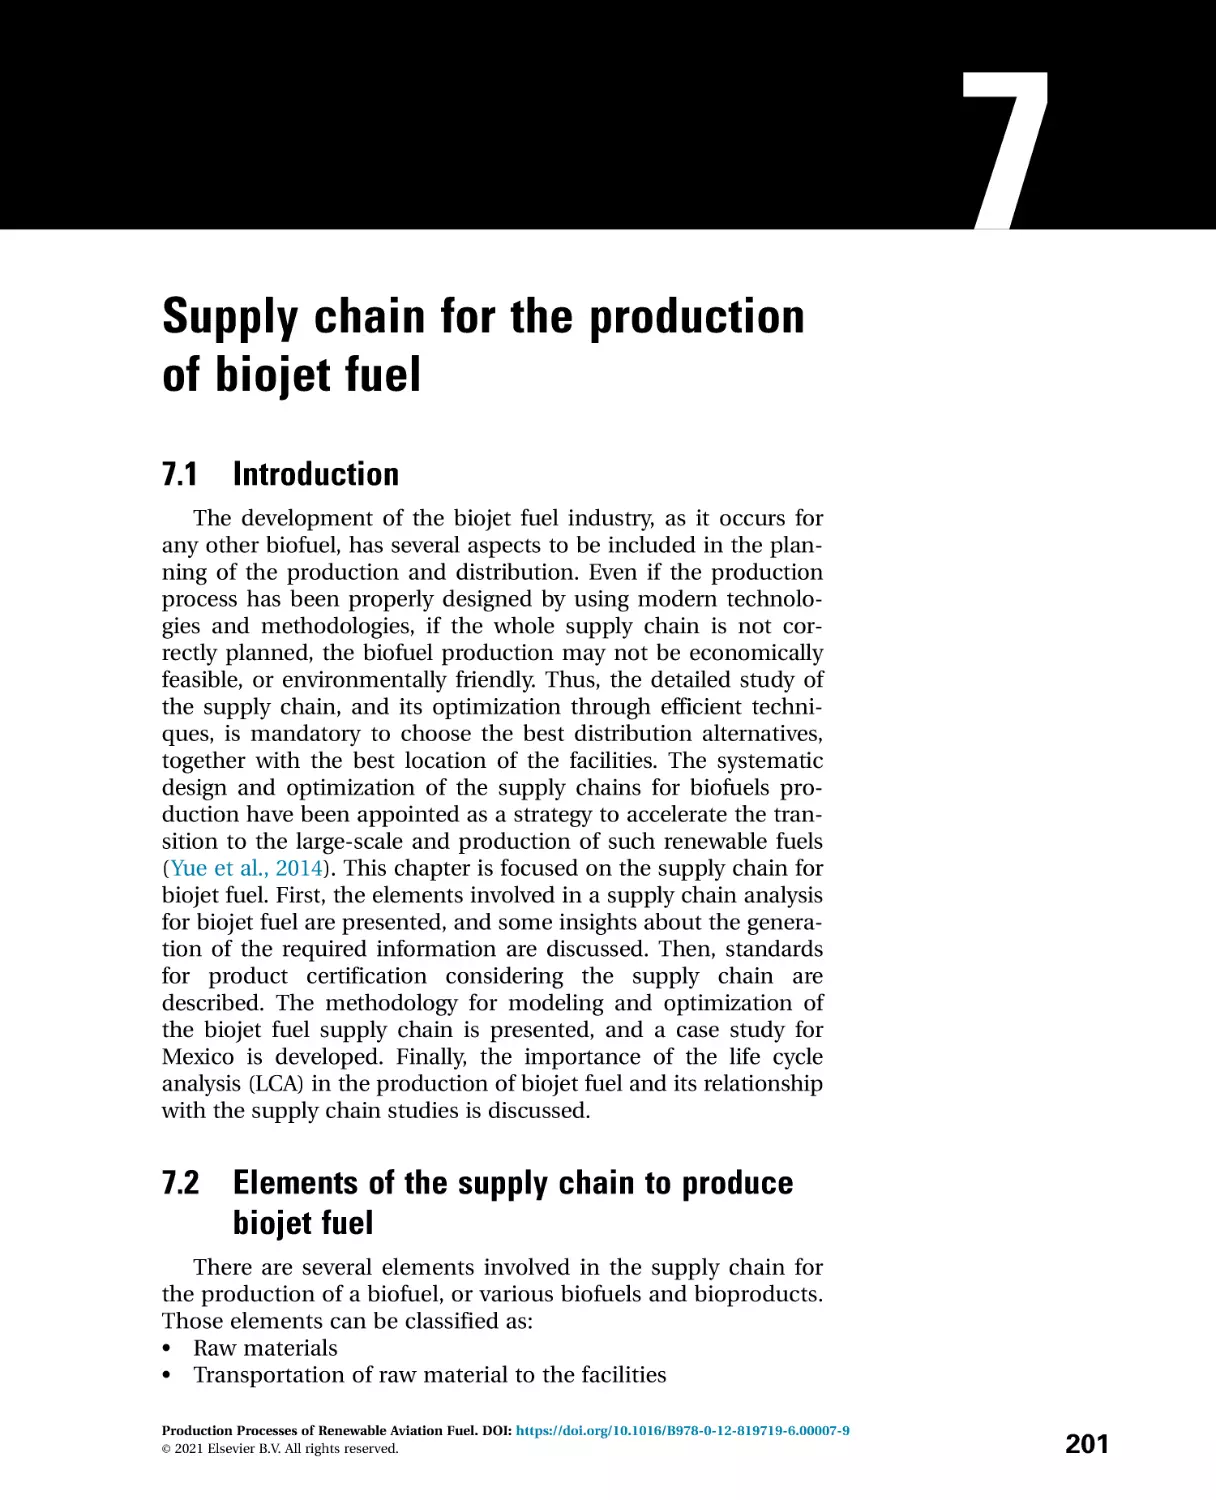 7---Supply-chain-for-the-production-o_2021_Production-Processes-of-Renewable
7 Supply chain for the production of biojet fuel
7.1 Introduction
7.2 Elements of the supply chain to produce biojet fuel